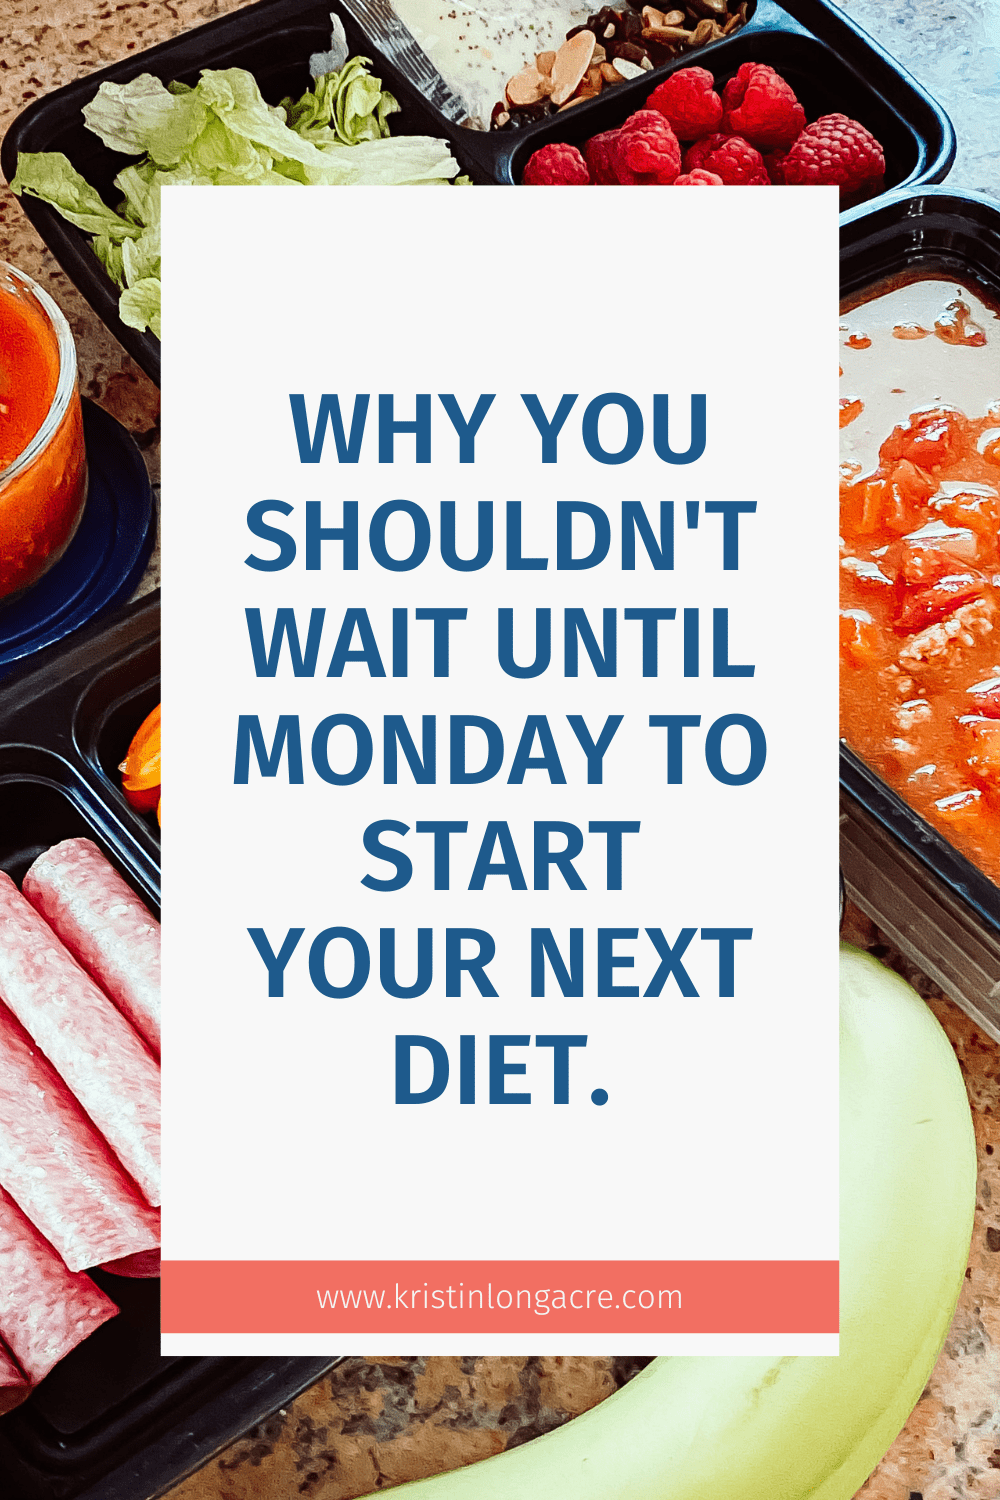 Why You Shouldn't Wait Until Monday to Start Your Diet